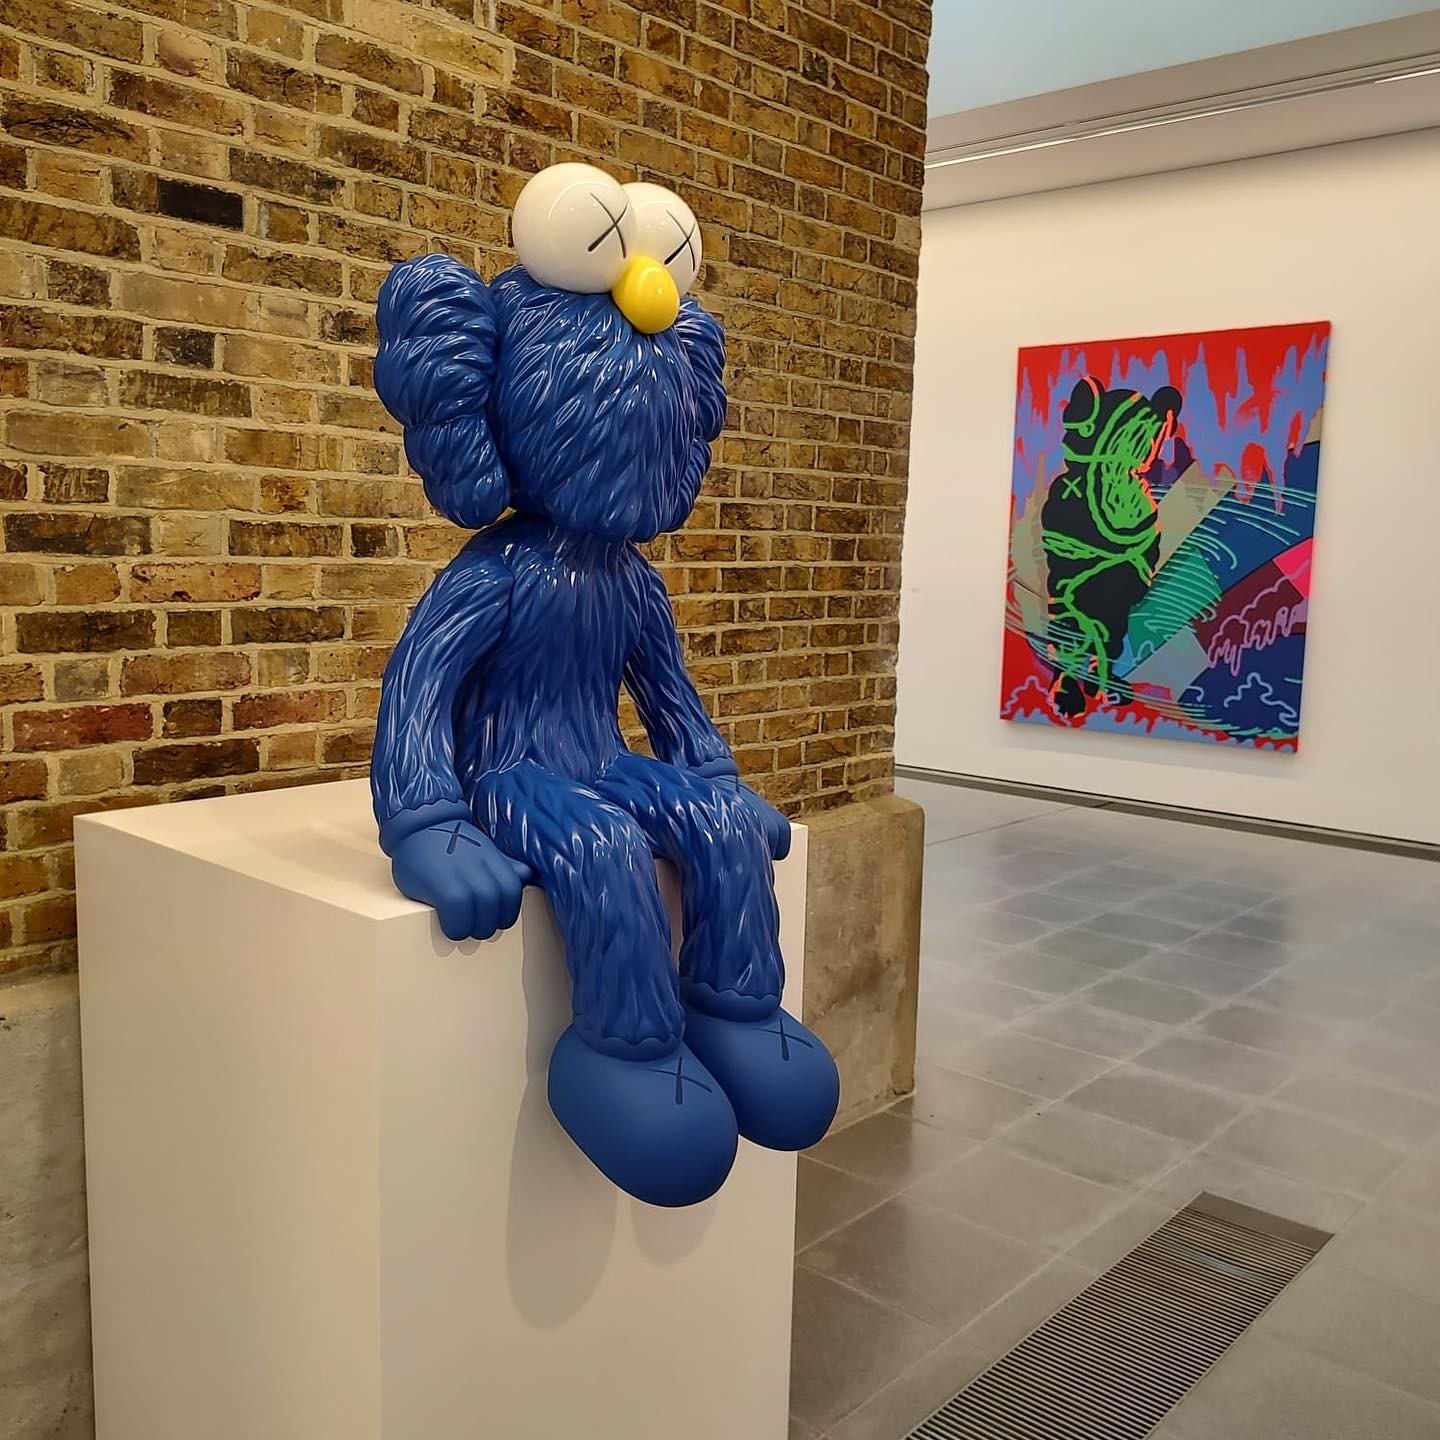 KAWS Reaches New Audiences With Fortnite Collaboration - Ocula